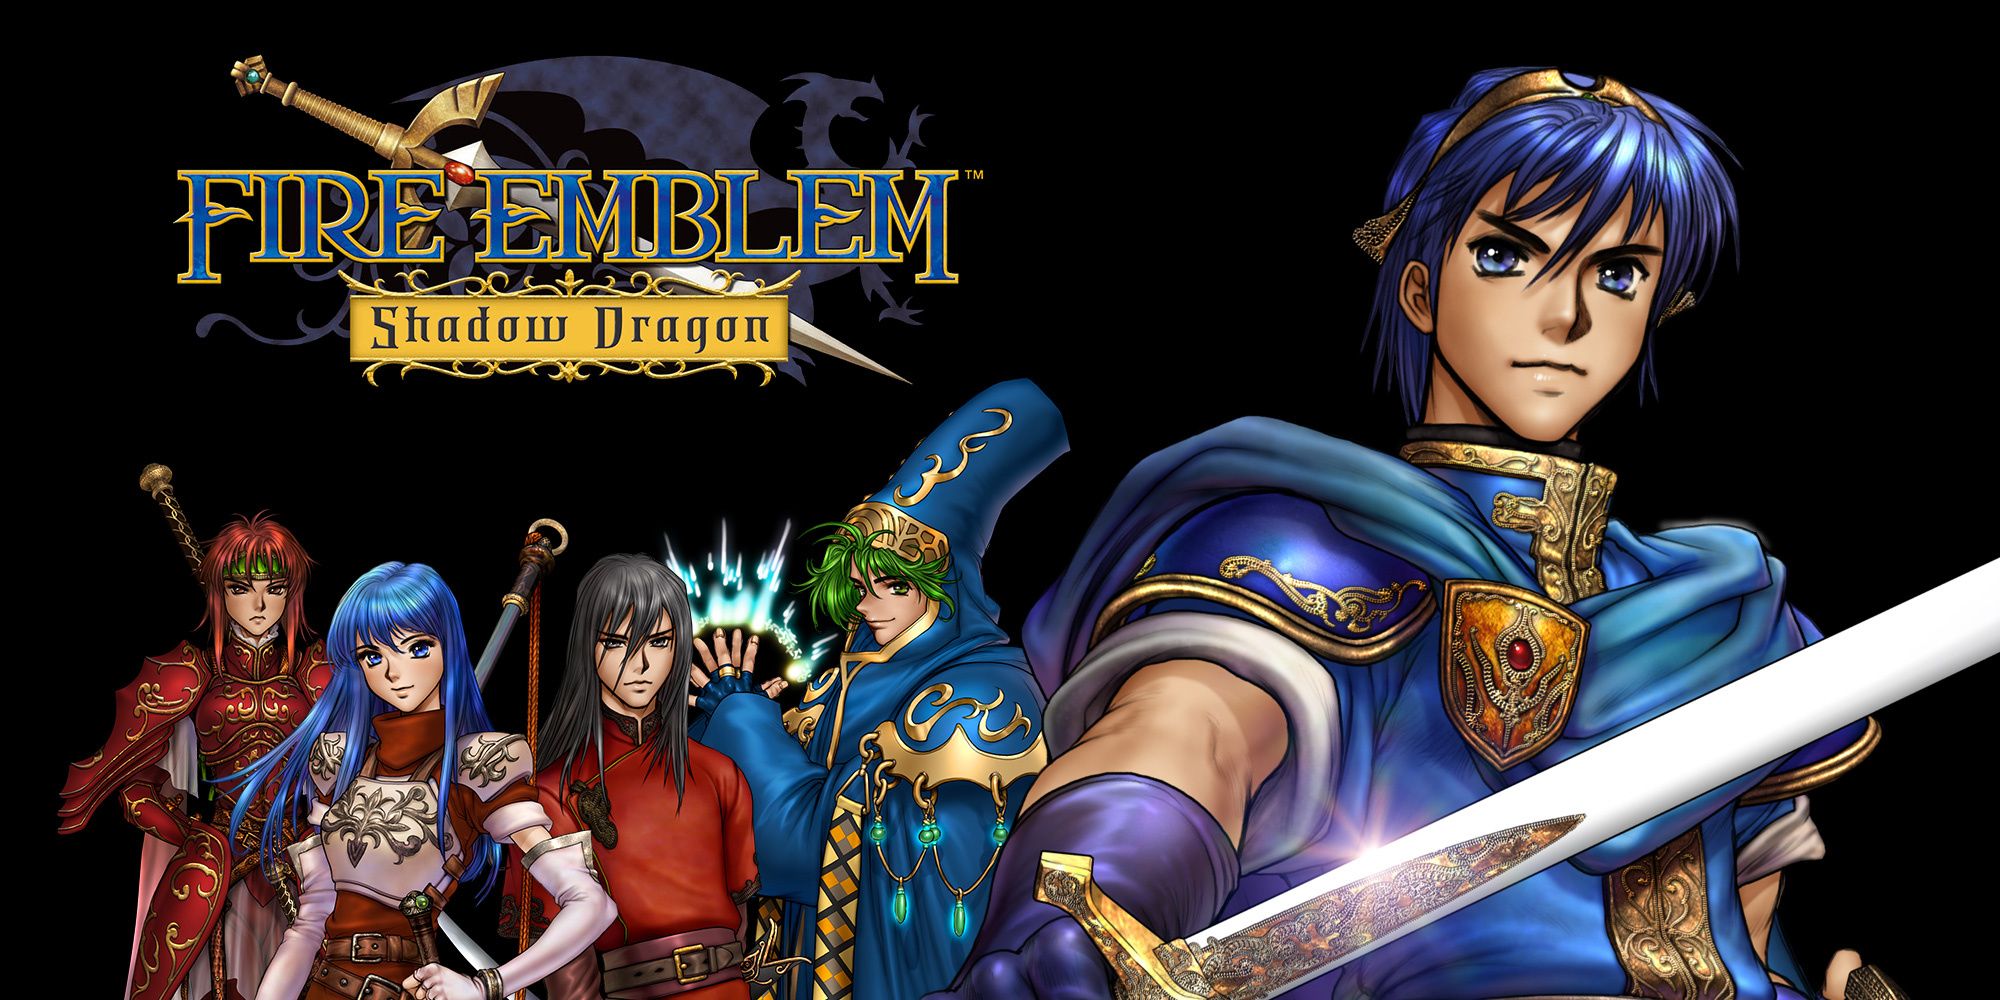 Fire Emblem Shadow Dragon artwork has Mark front in center with his party behind him.